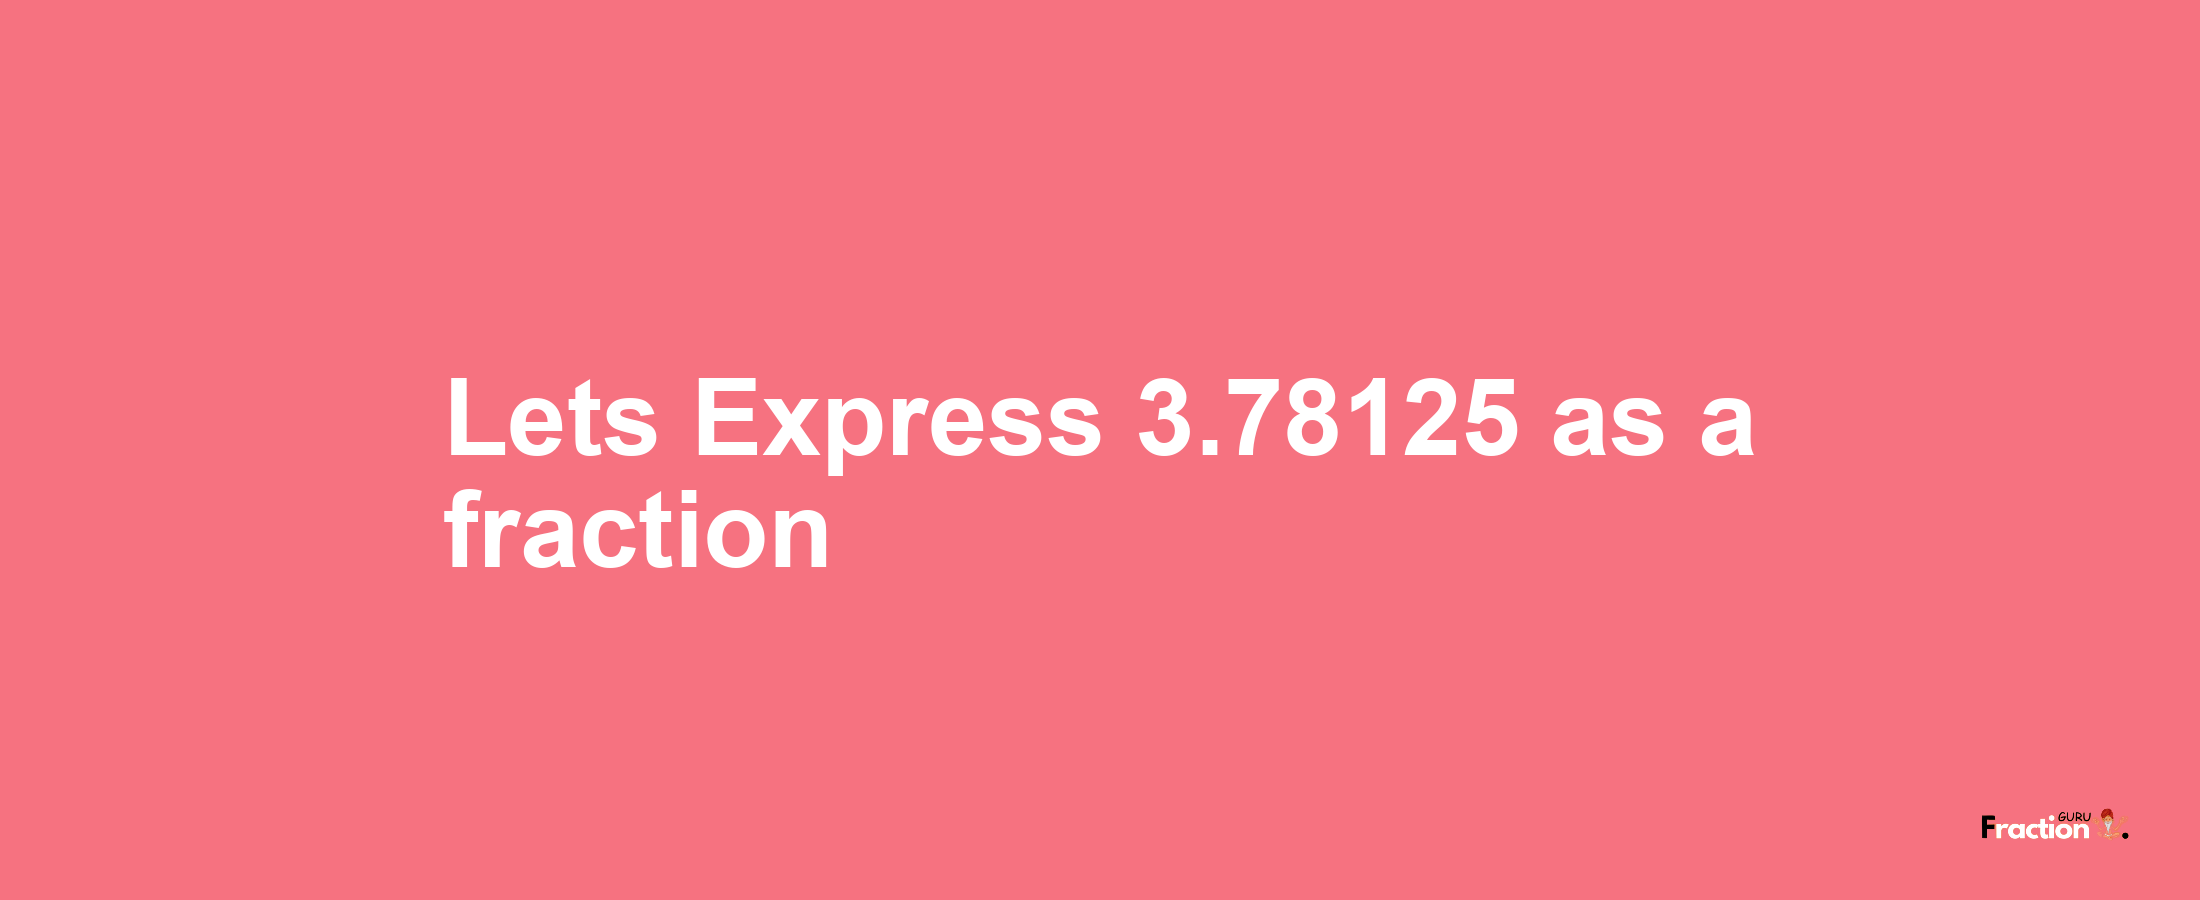 Lets Express 3.78125 as afraction